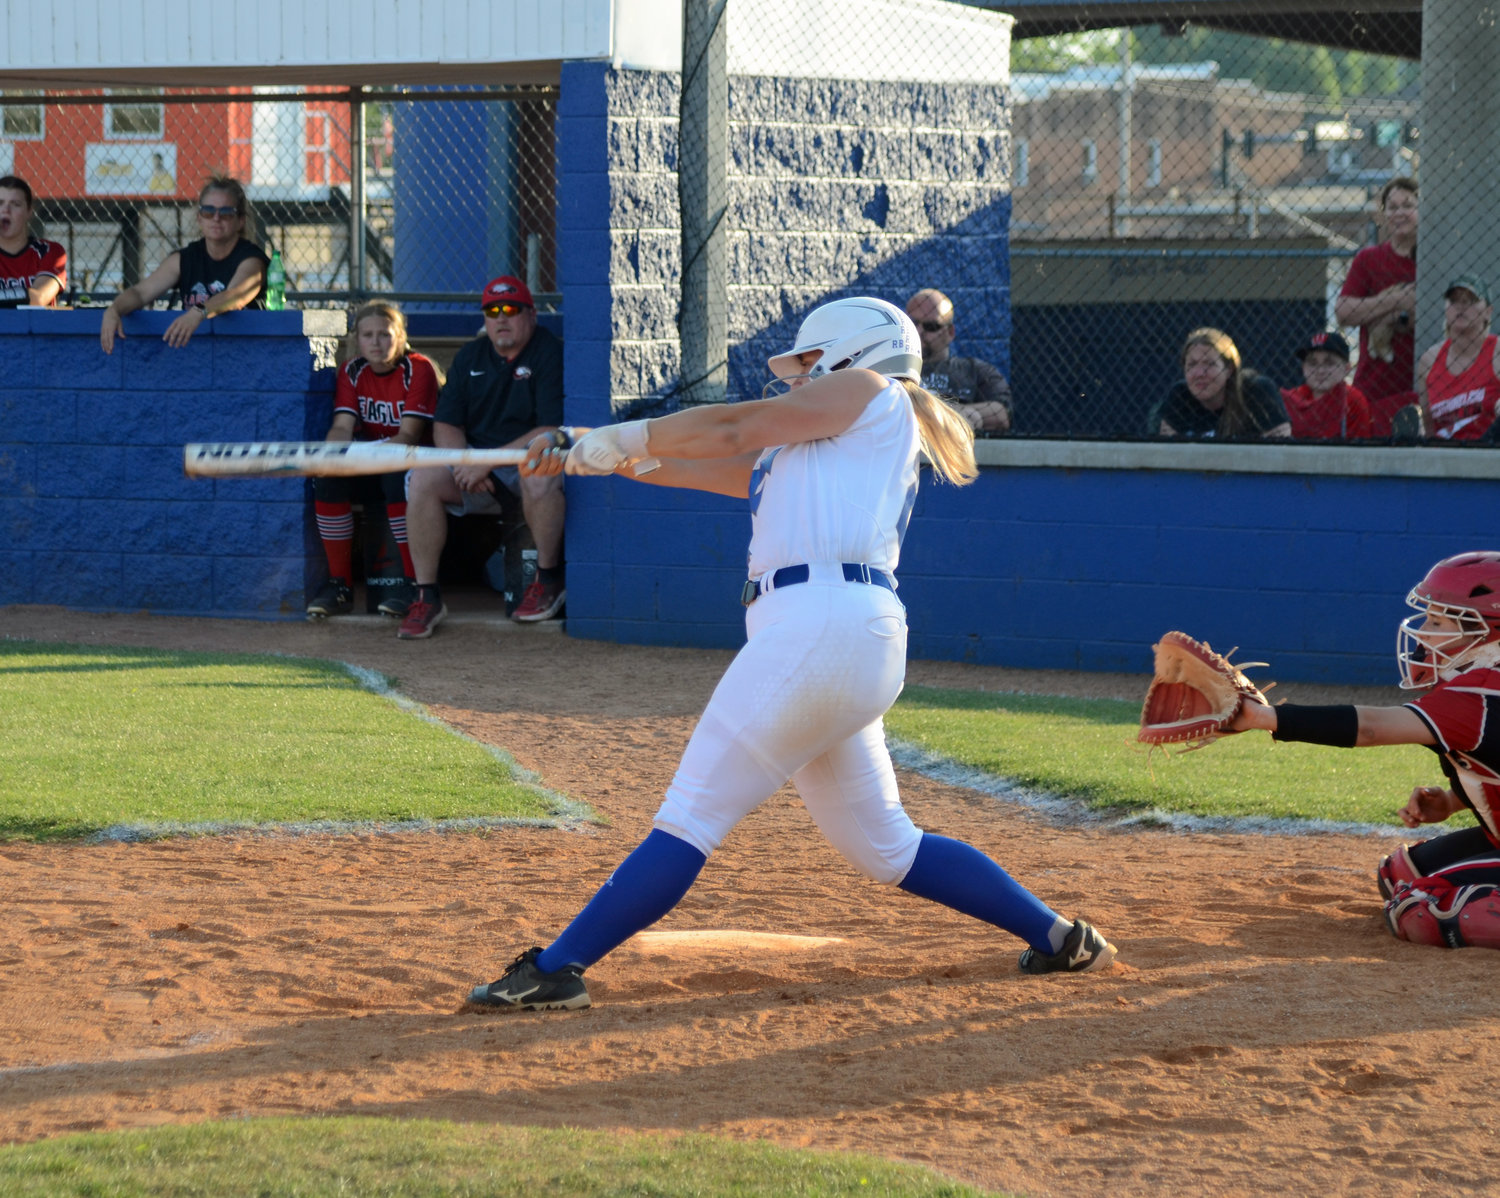 Sophomore Leslie Bartoli rips the go-ahead base hit in the bottom of the sixth inning for the Lady Rockets, who beat Westmoreland 5-2 to advance to next week’s Spring Fling XXIX in Murfreesboro.